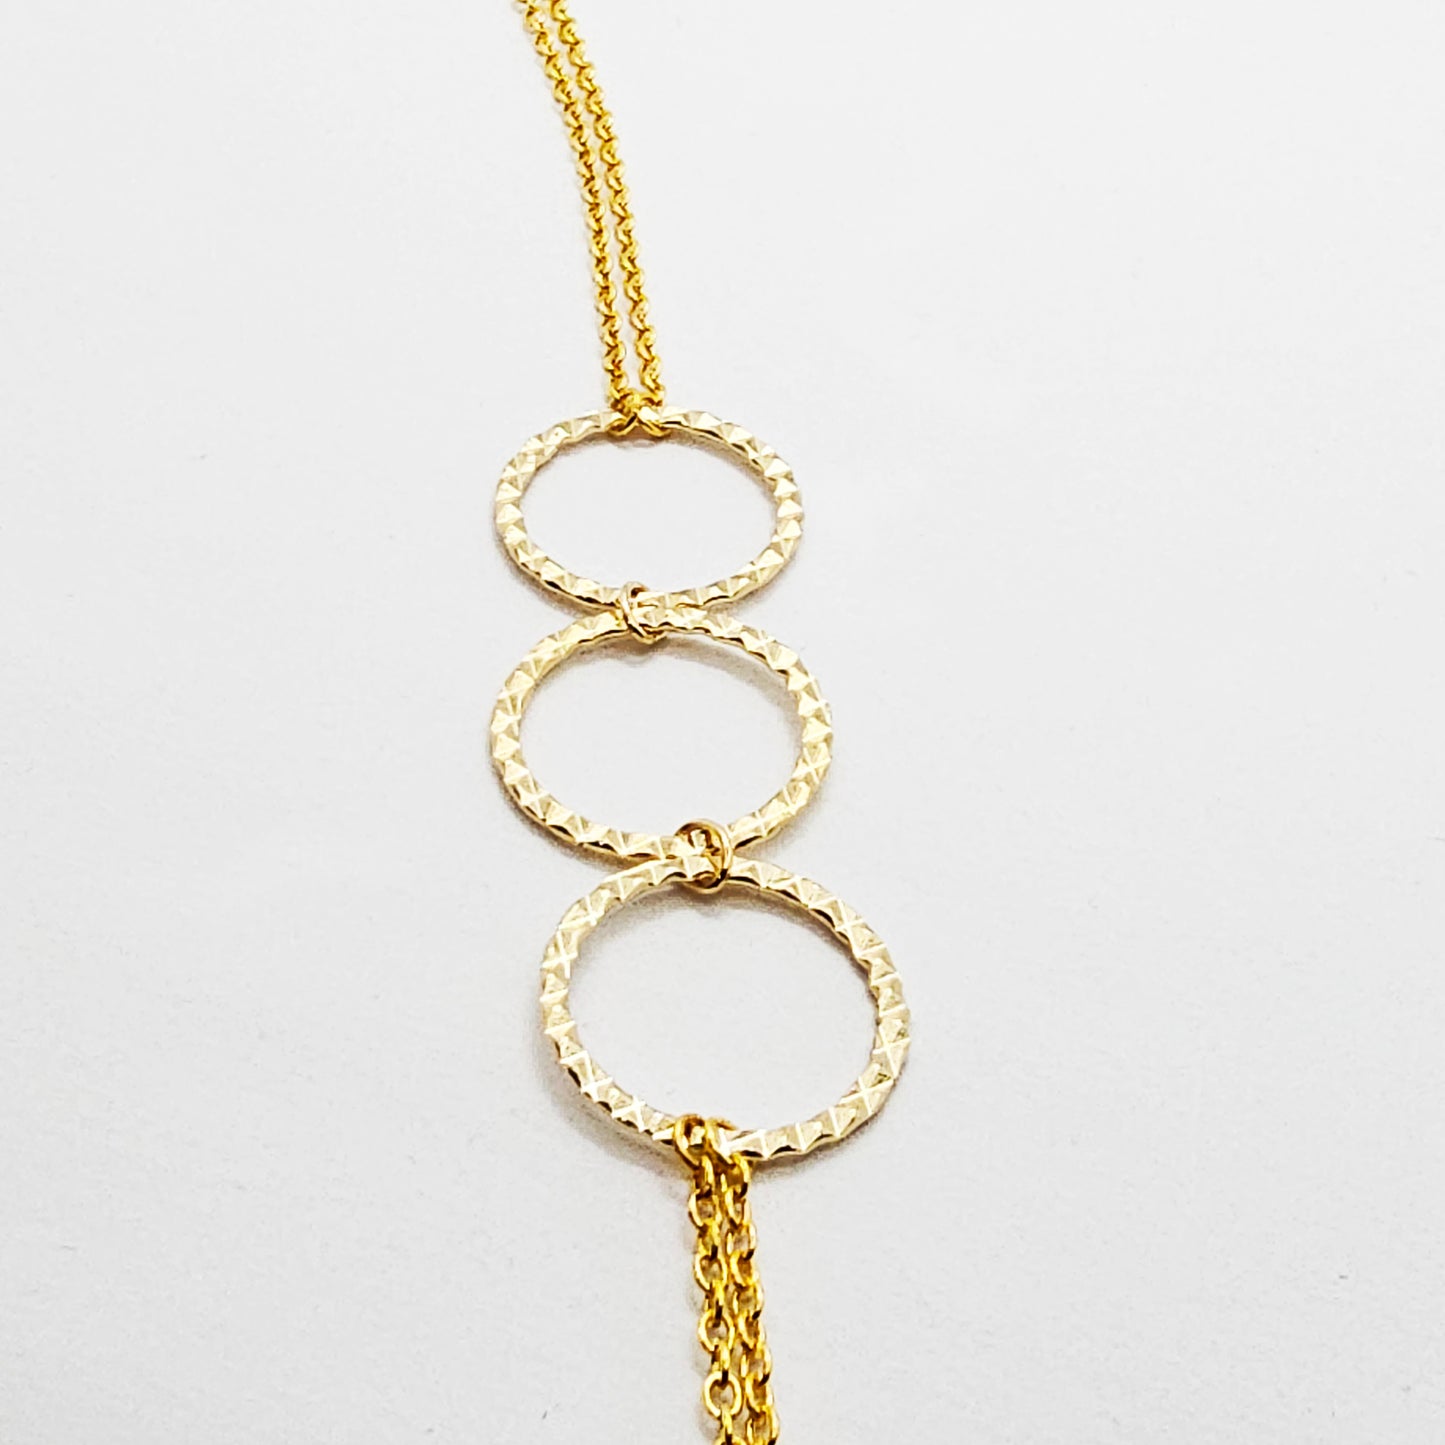 Gold Tri circle necklace attached to nipple nooses or feel the sting with one of our five types of nipple clamps.